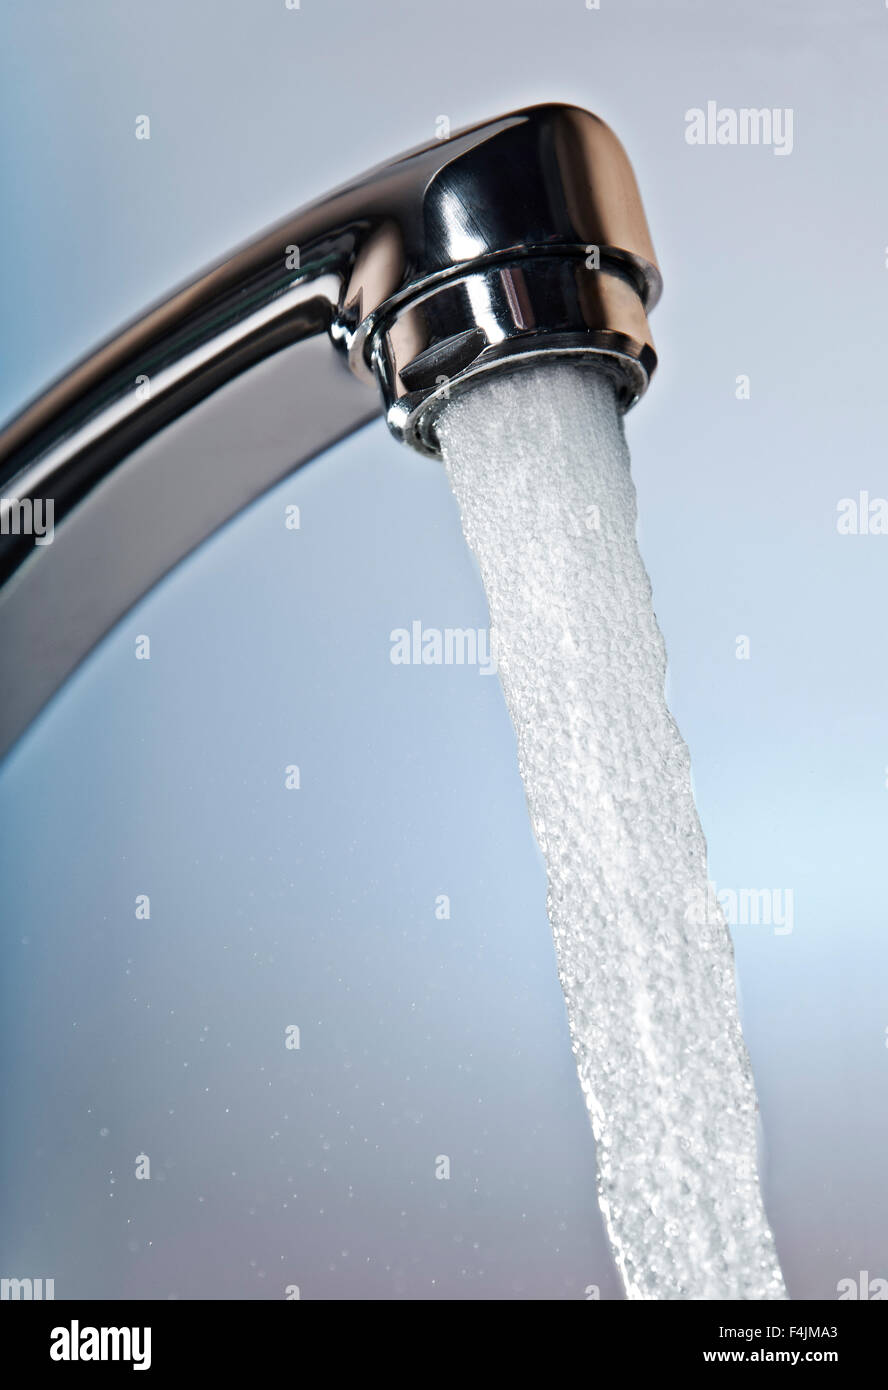 Water flows from a tap Stock Photo